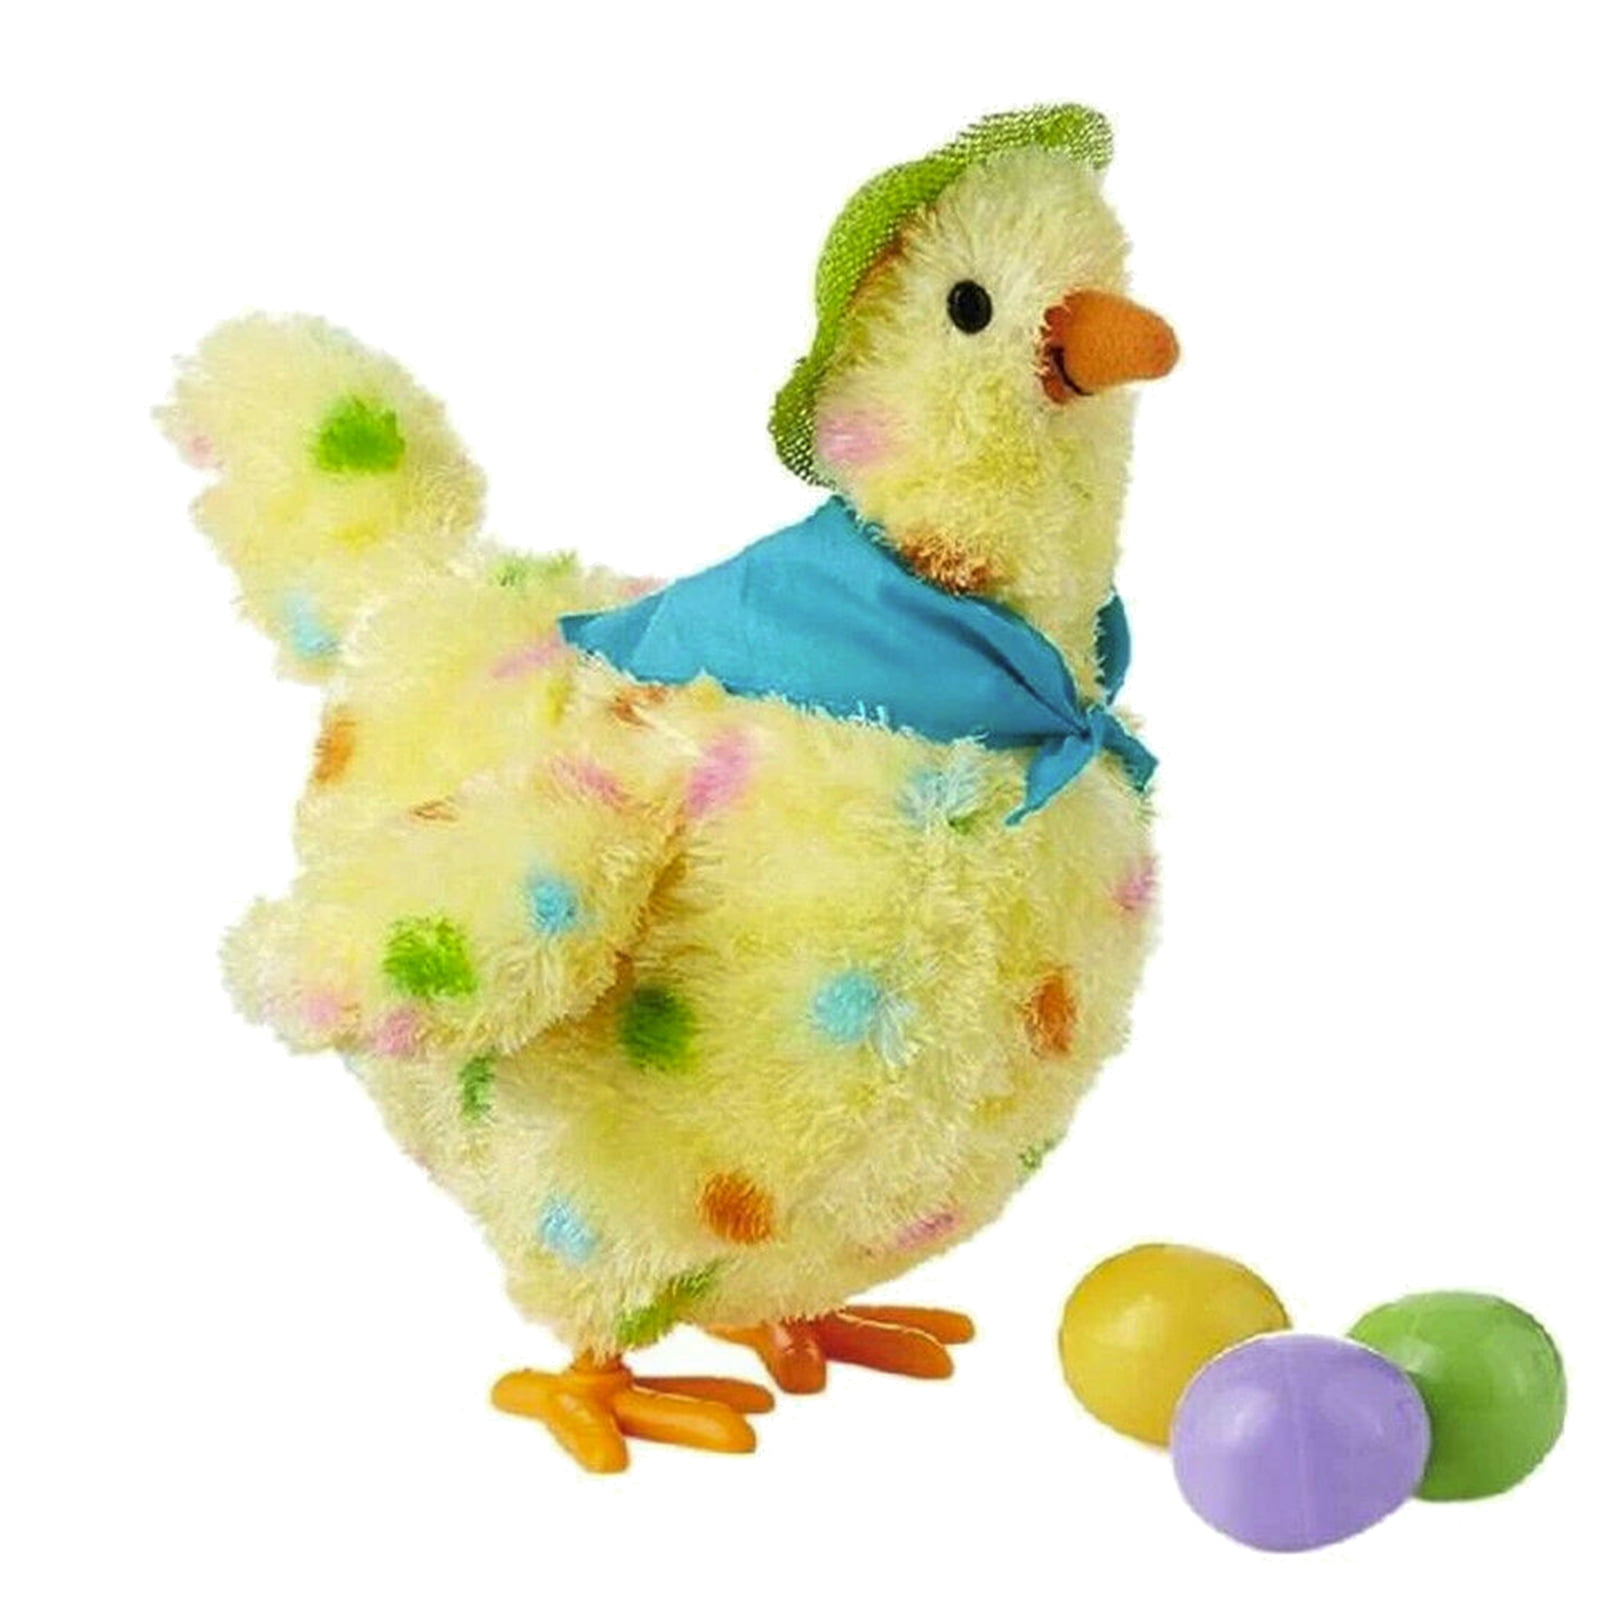 THE HEN THAT LAY EGGS!! Toys for Kids - Christmas Games for Children 